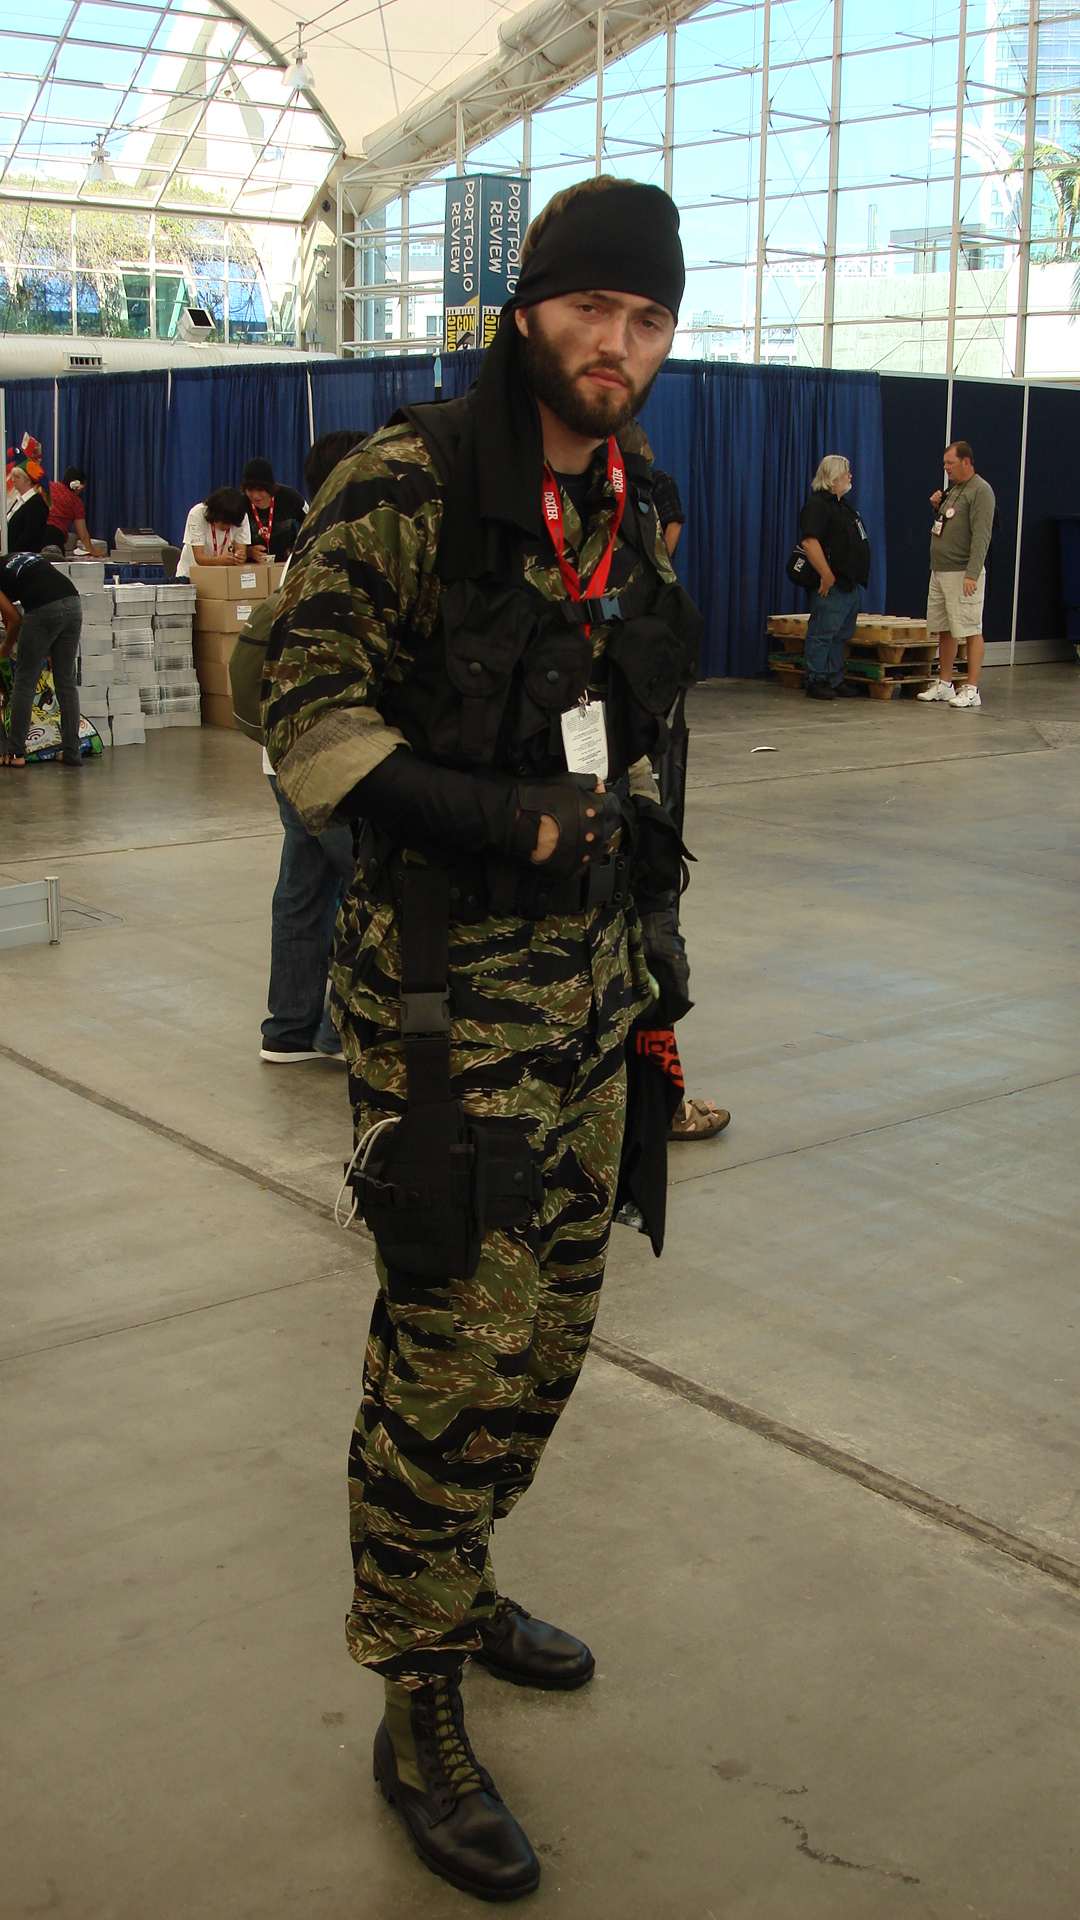 Comic Con - Solid Snake